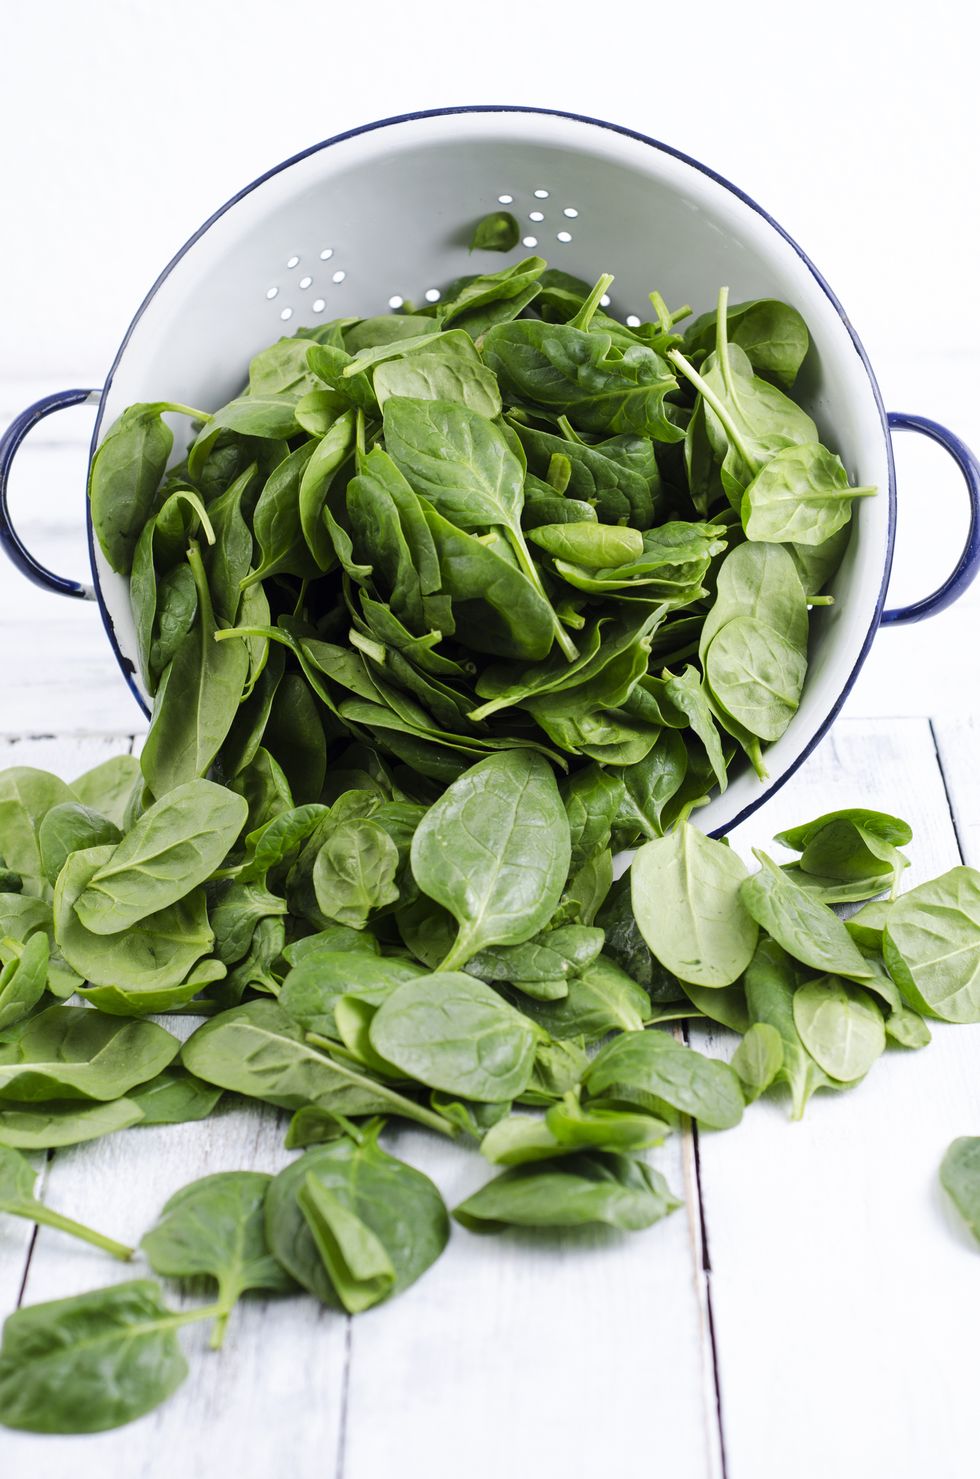 Colander and fresh spinach leaves